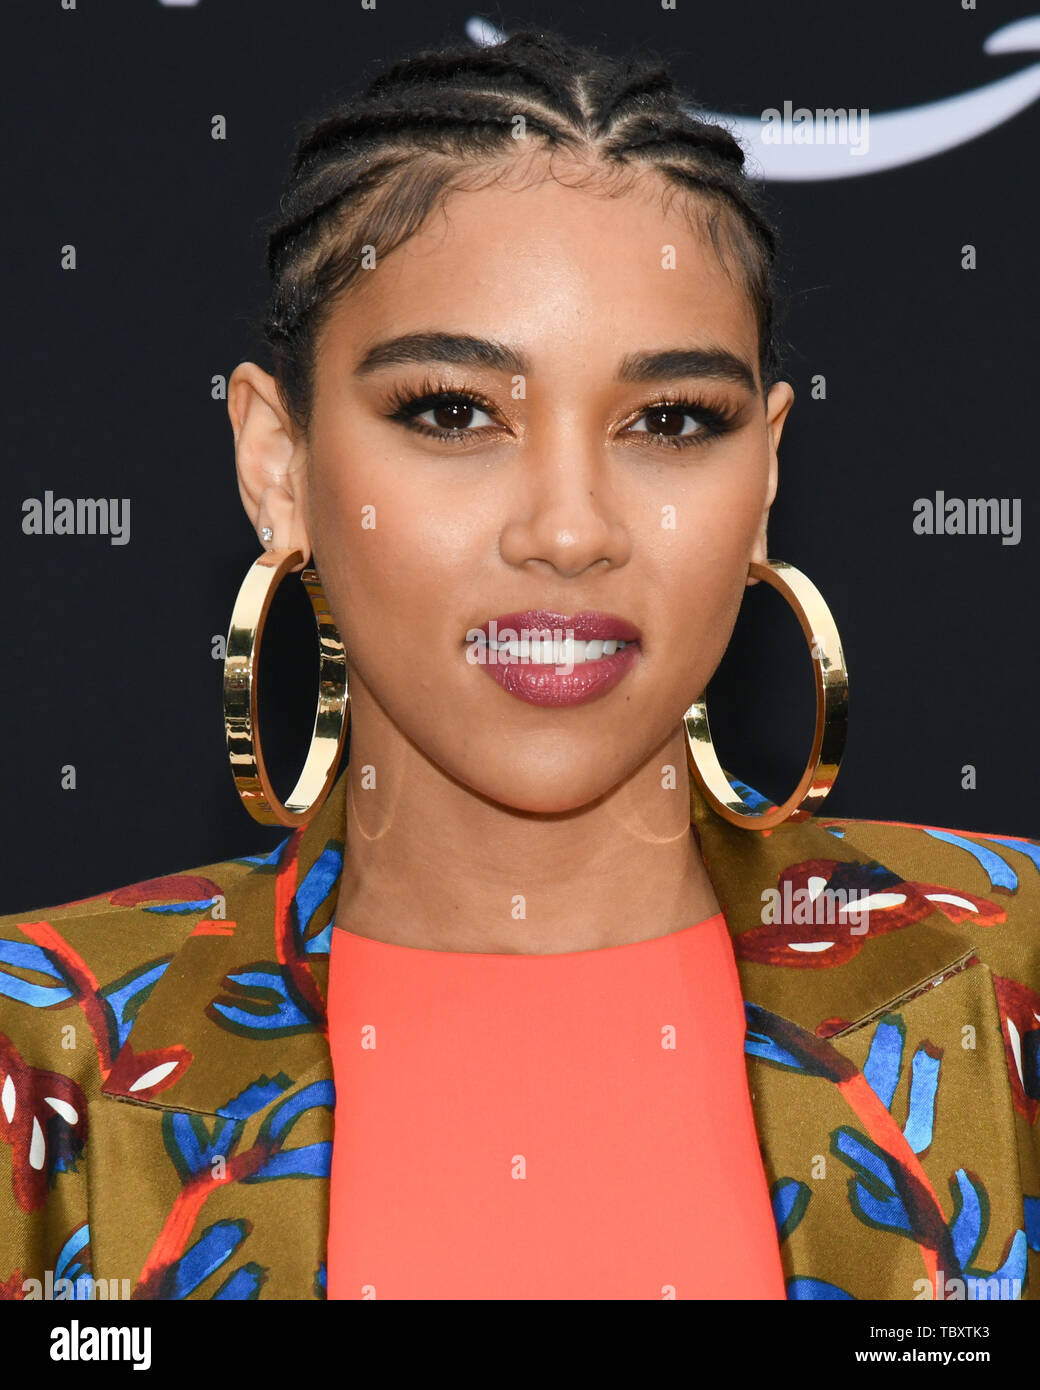 June 3, 2019 - Westwood, California, USA - 02, June 2019 - Westwood Village, California. Alexandra Shipp attends Premiere Of Amazon Prime Video's 'Chasing Happiness' at the Regency Village Bruin Theatre. (Credit Image: © Billy Bennight/ZUMA Wire) Stock Photo